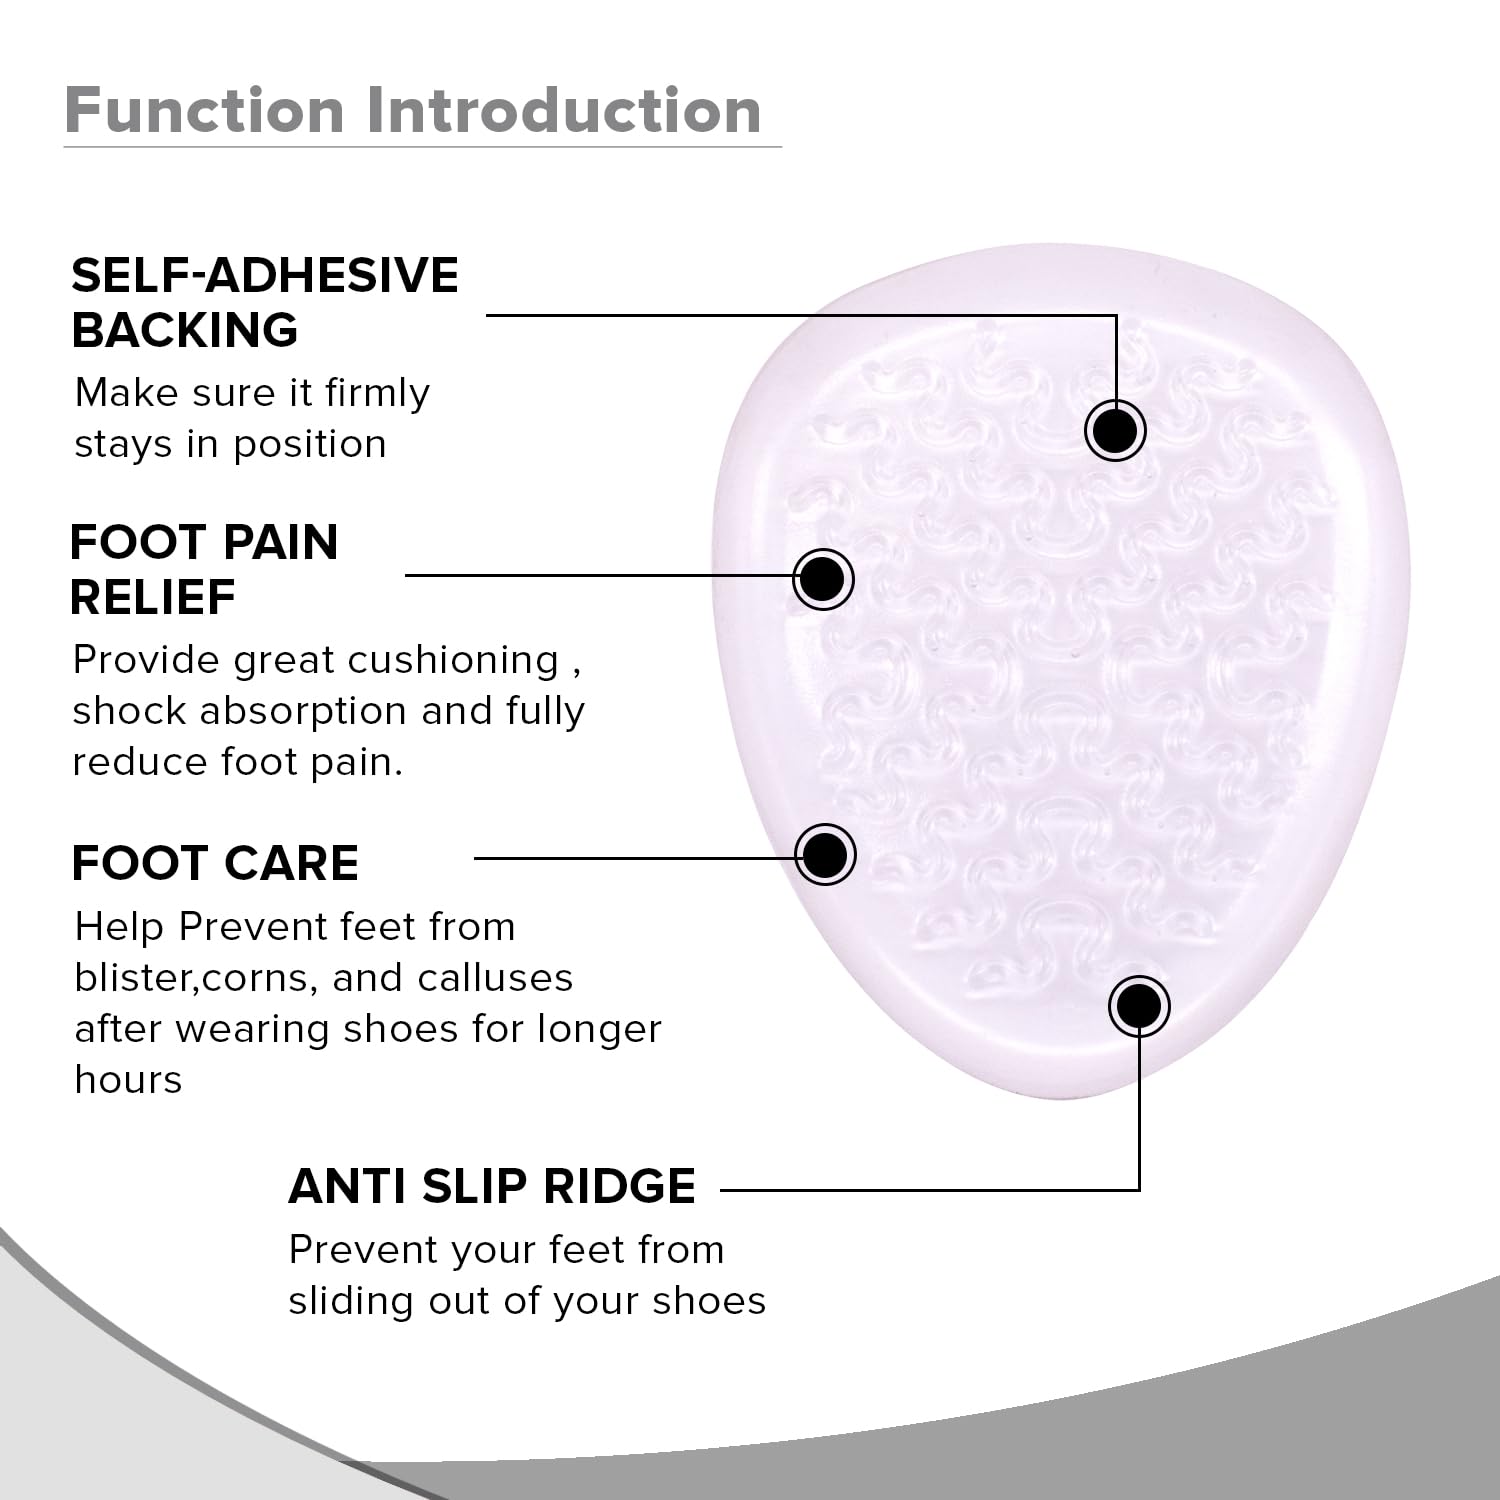 Dr Foot Ball of Foot Cushions for High Heels | For Reduce ForeFoot Pain & Support | All Day Ultra Comfort | For Women |1 Pair